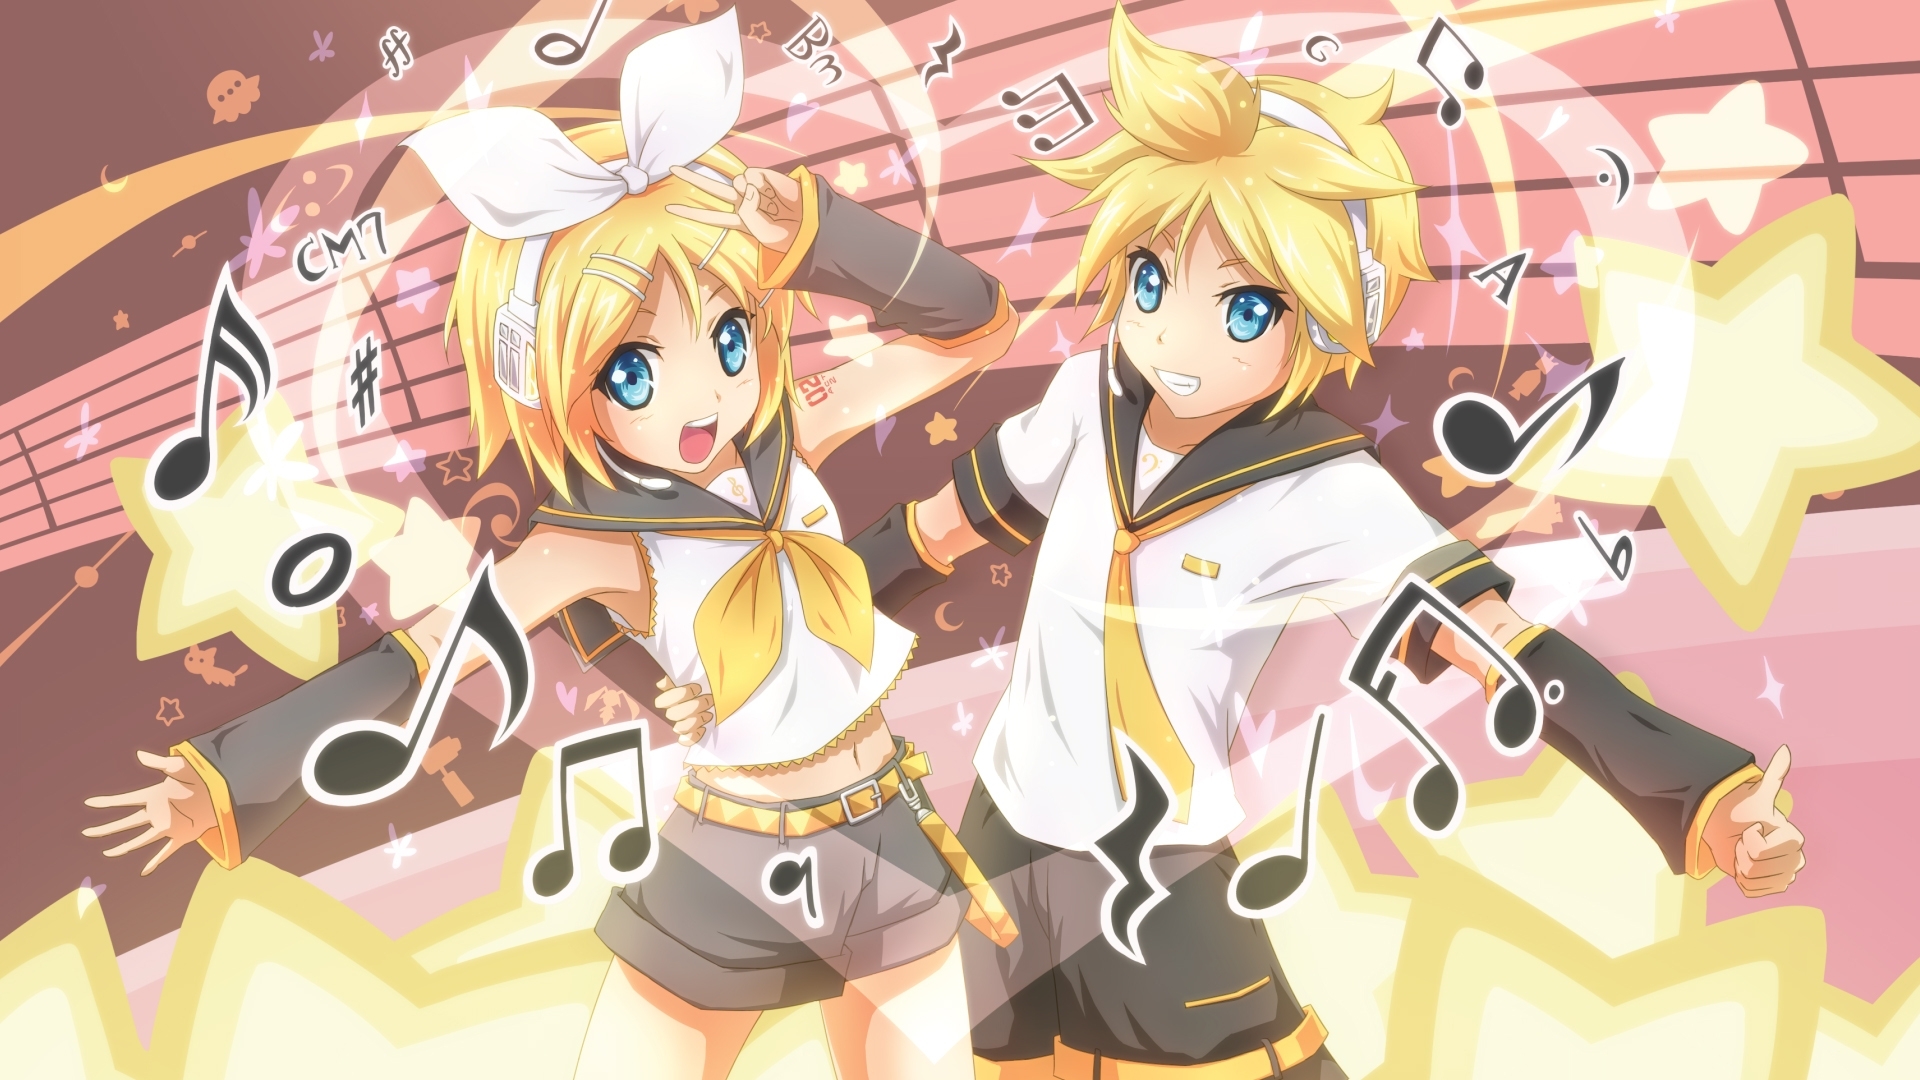 10 New Rin And Len Wallpaper FULL HD 1080p For PC Background 2020